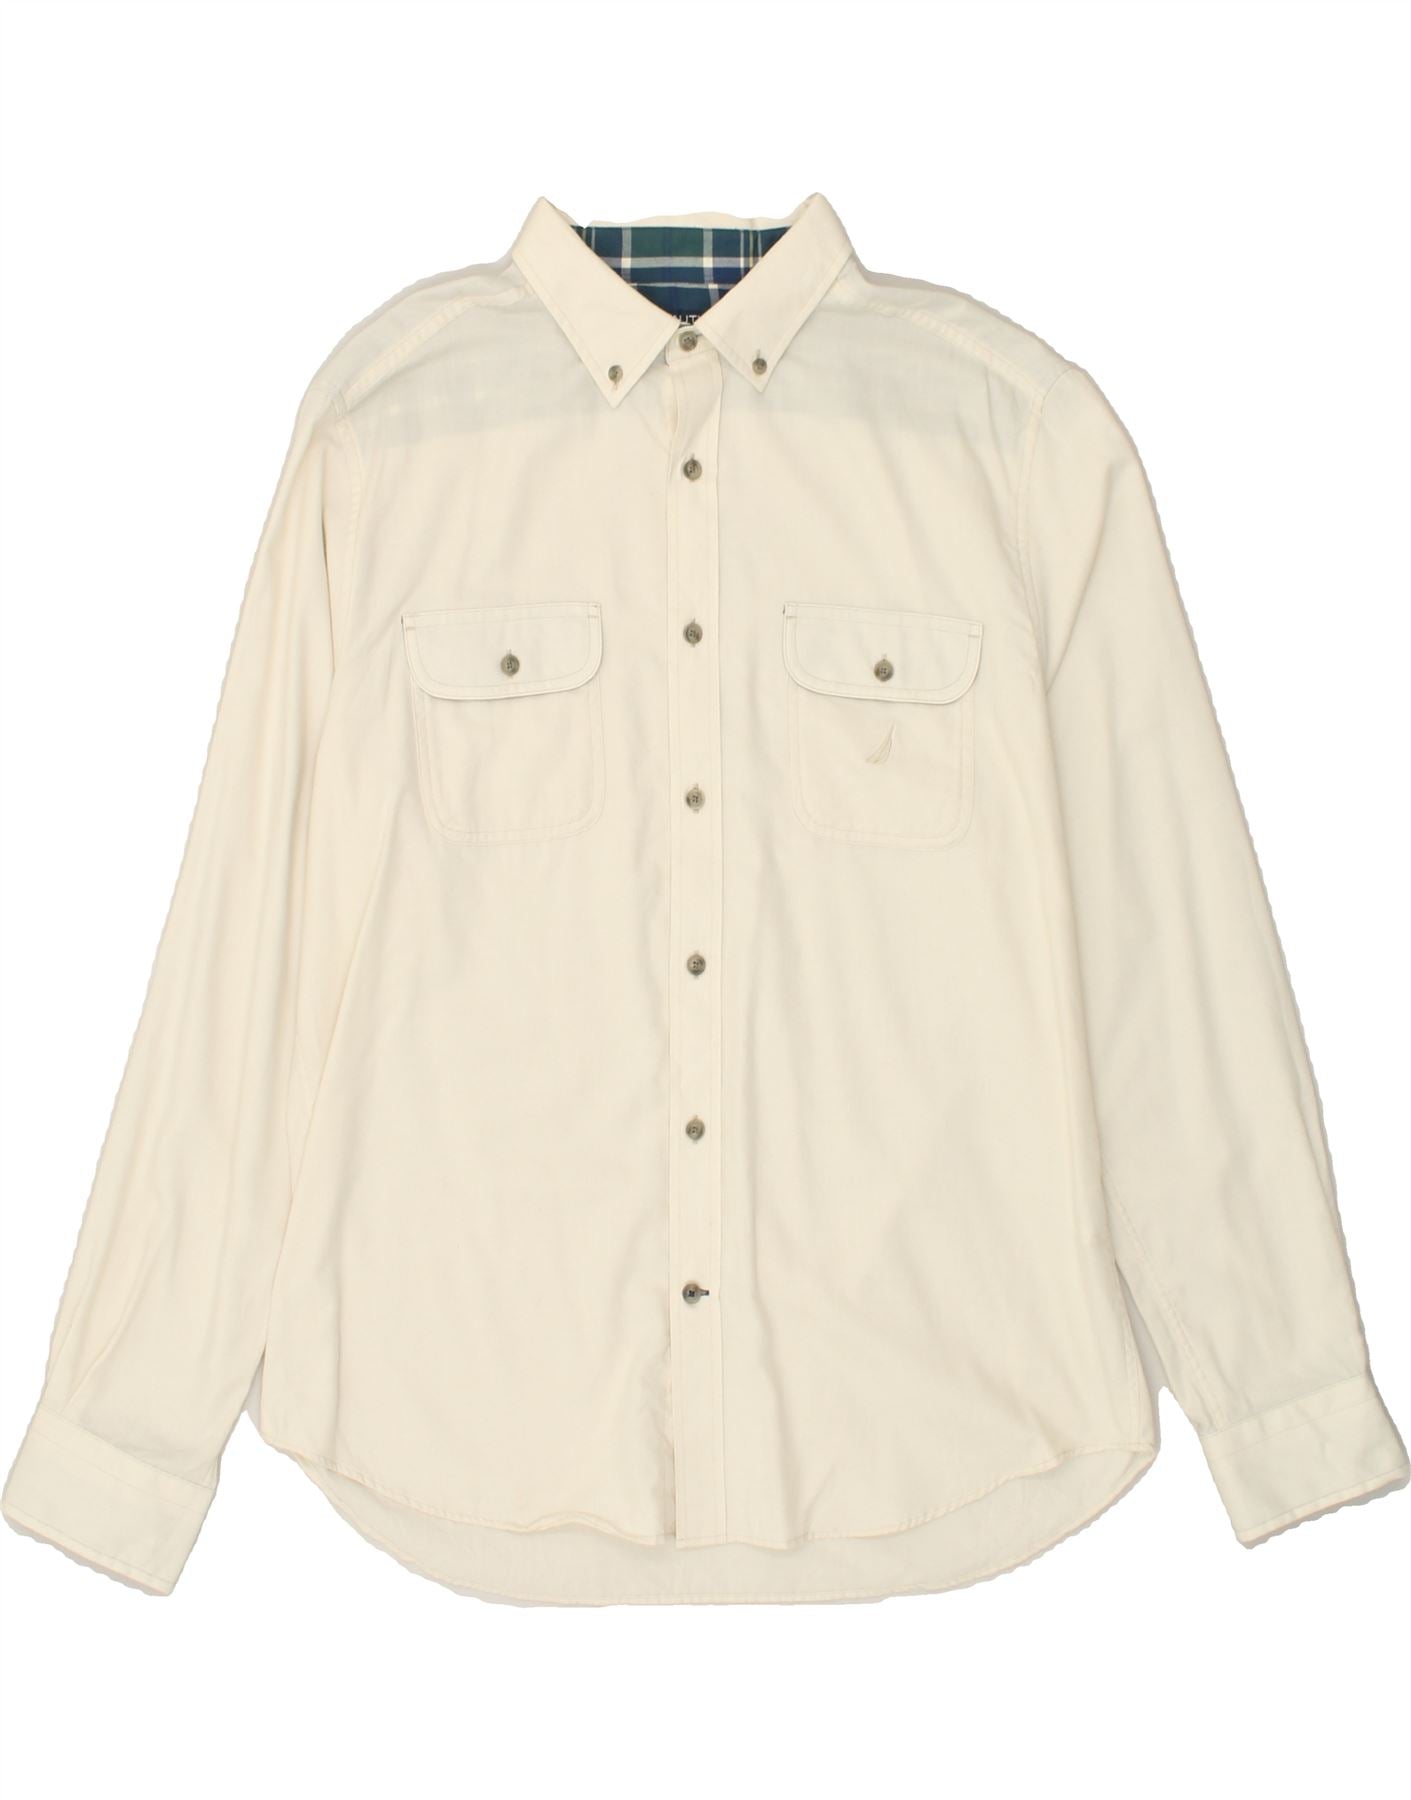 NAUTICA Mens Classic Fit Shirt Large Off White Cotton, Vintage &  Second-Hand Clothing Online